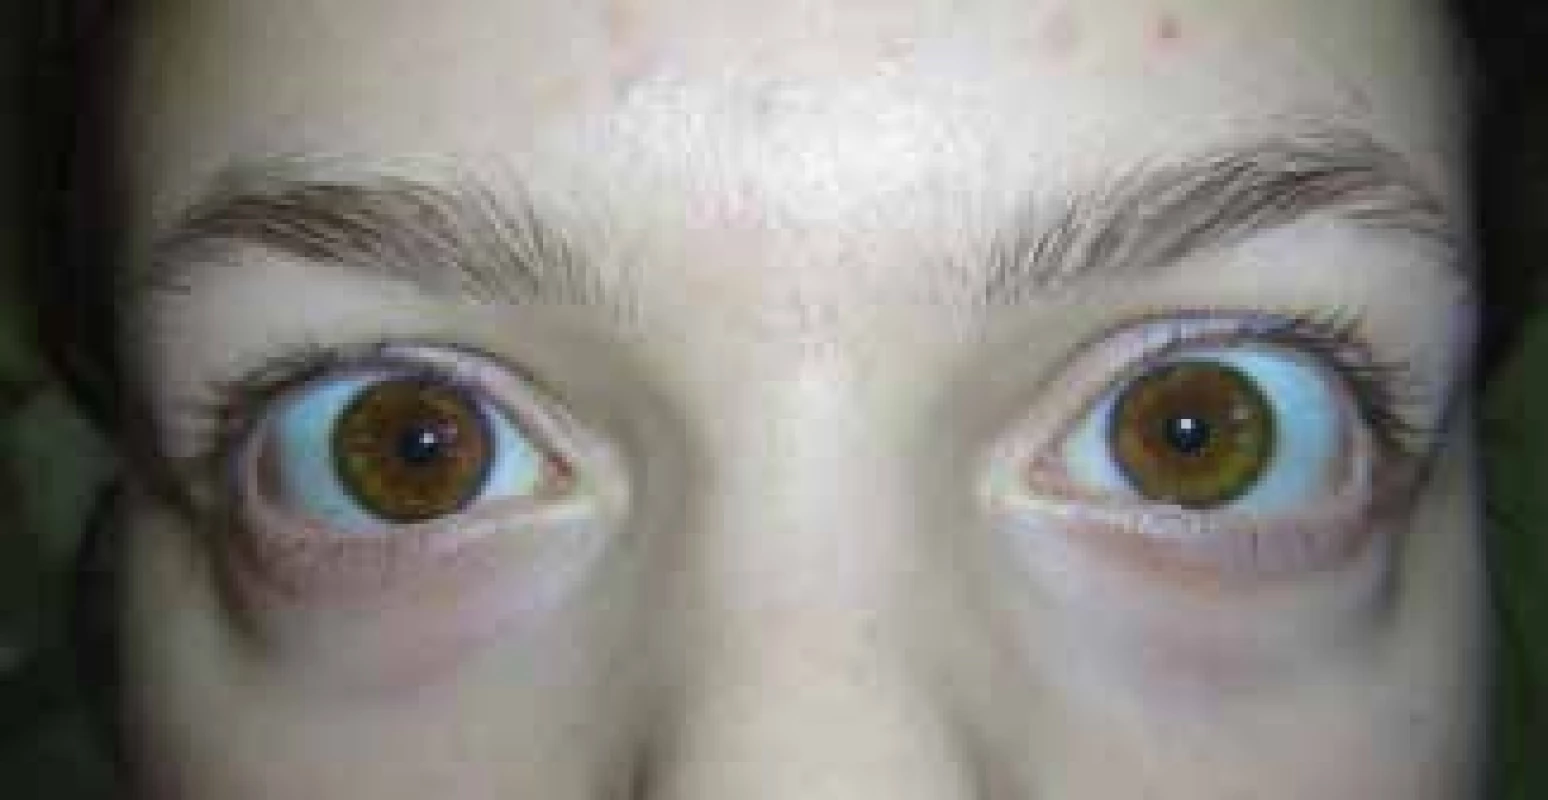 Normalisation of pupil width at follow-up examination
of patient one day later